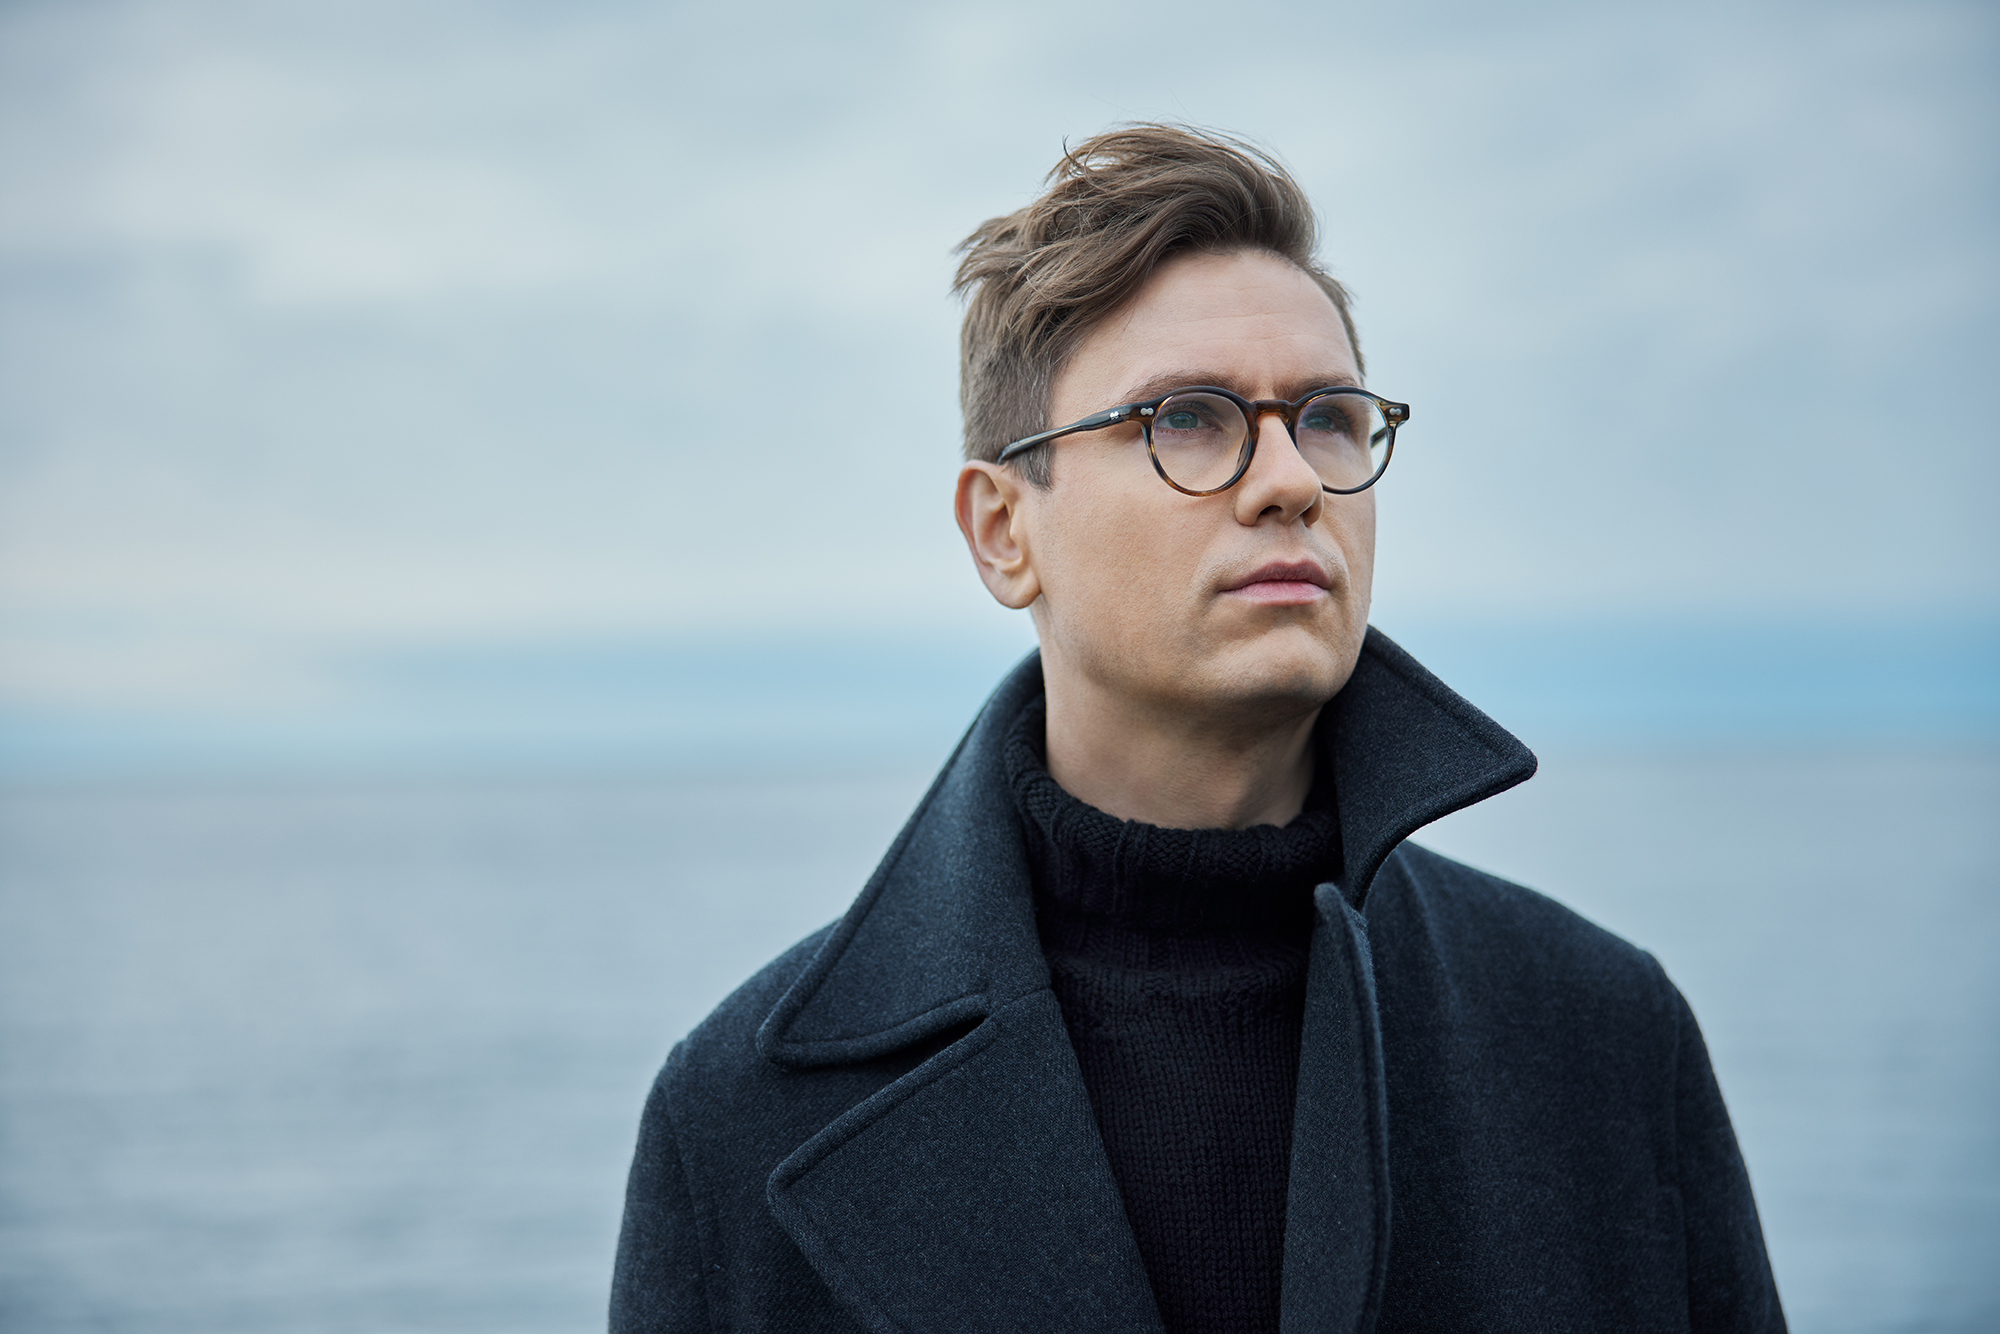 Pianist Vikingur Olafsson stands in front of the ocean, gazing upward and slightly to the right. He is wearing glasses and a dark shirt and coat.